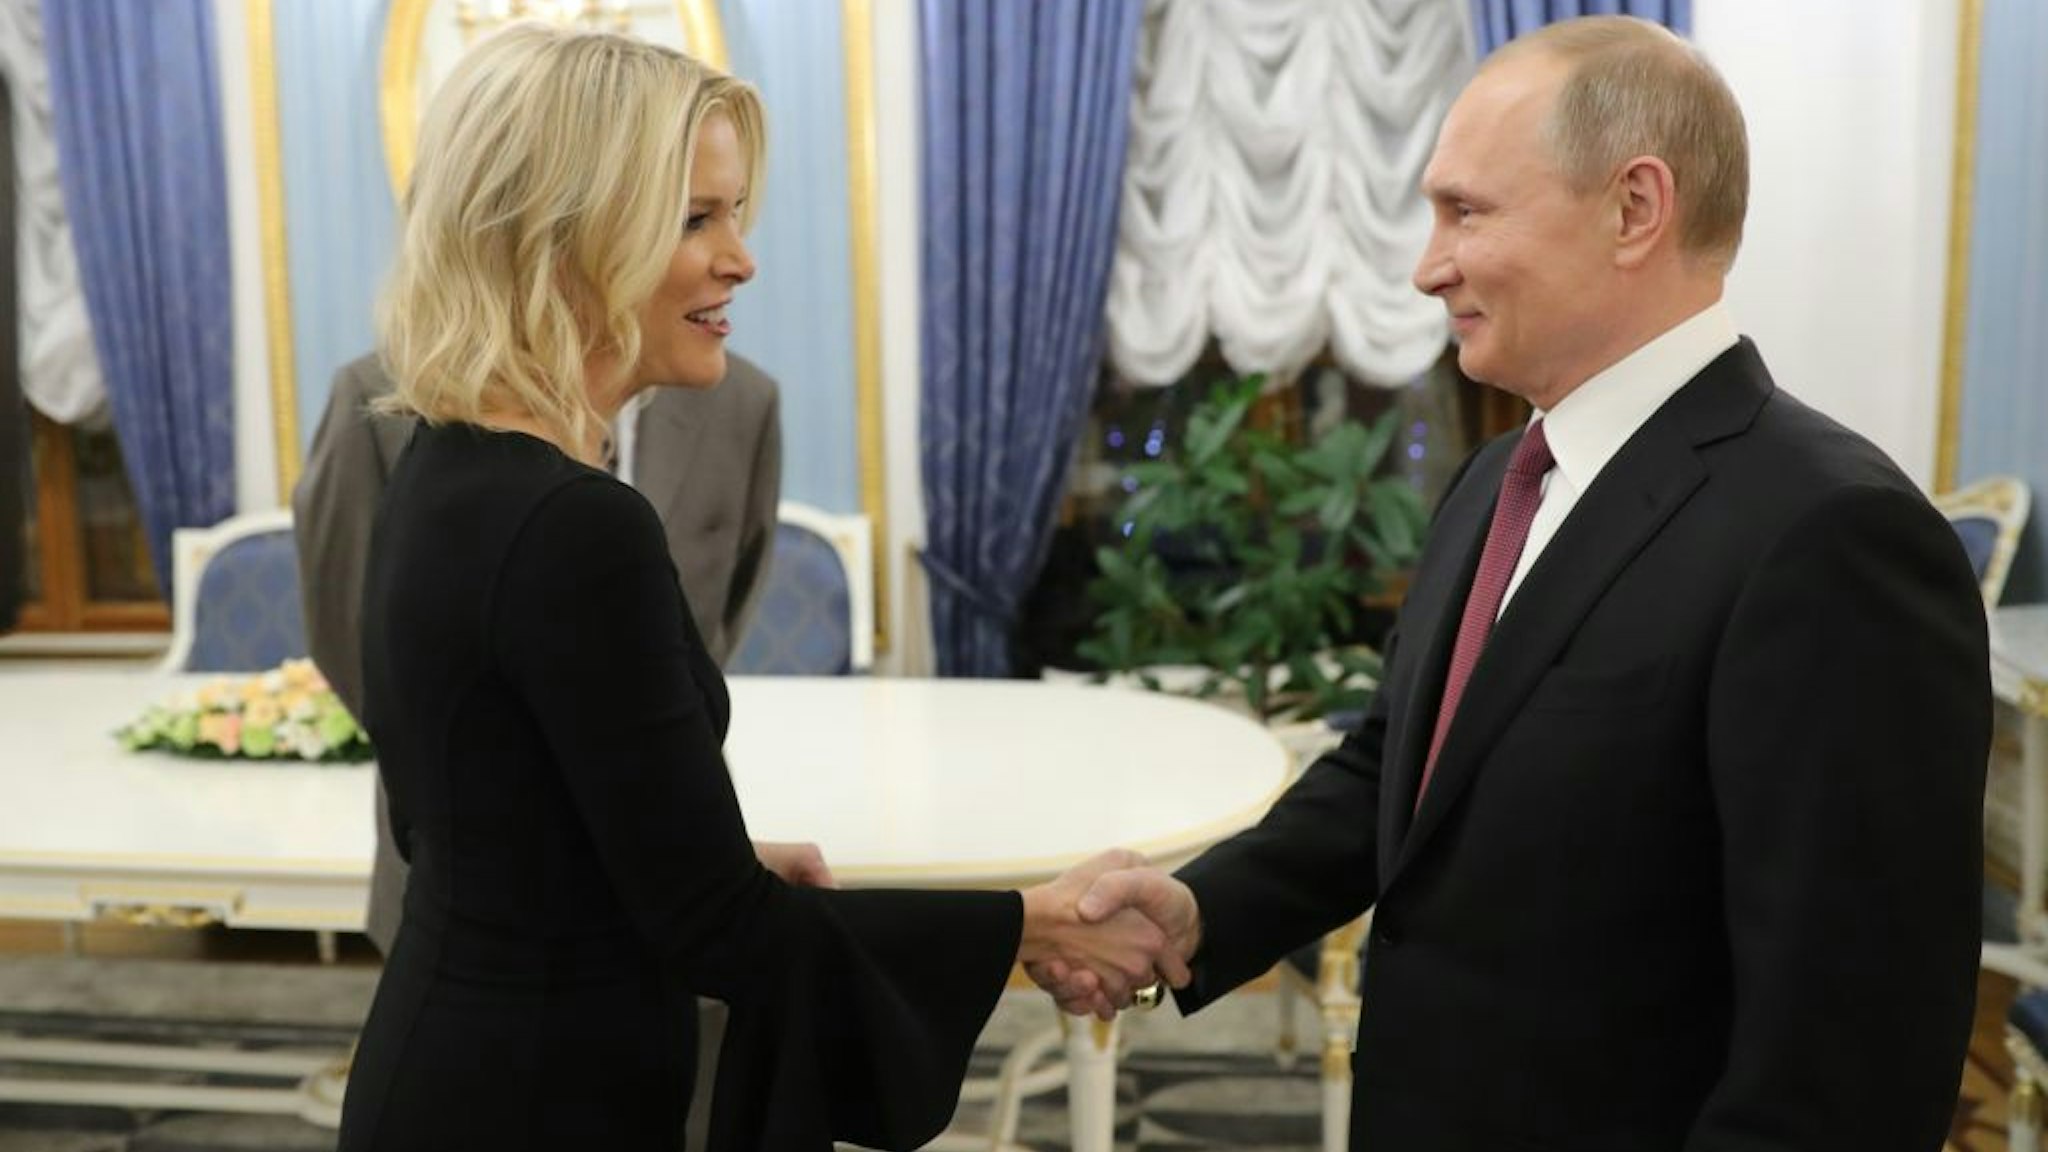 Russia's President Vladimir Putin (R) shakes hands with US NBC news network anchor Megyn Kelly prior to an interview at the Kremlin on March 1, 2018 in Moscow. (Photo by Mikhail KLIMENTYEV / SPUTNIK / AFP) (Photo credit should read MIKHAIL KLIMENTYEV/AFP via Getty Images)